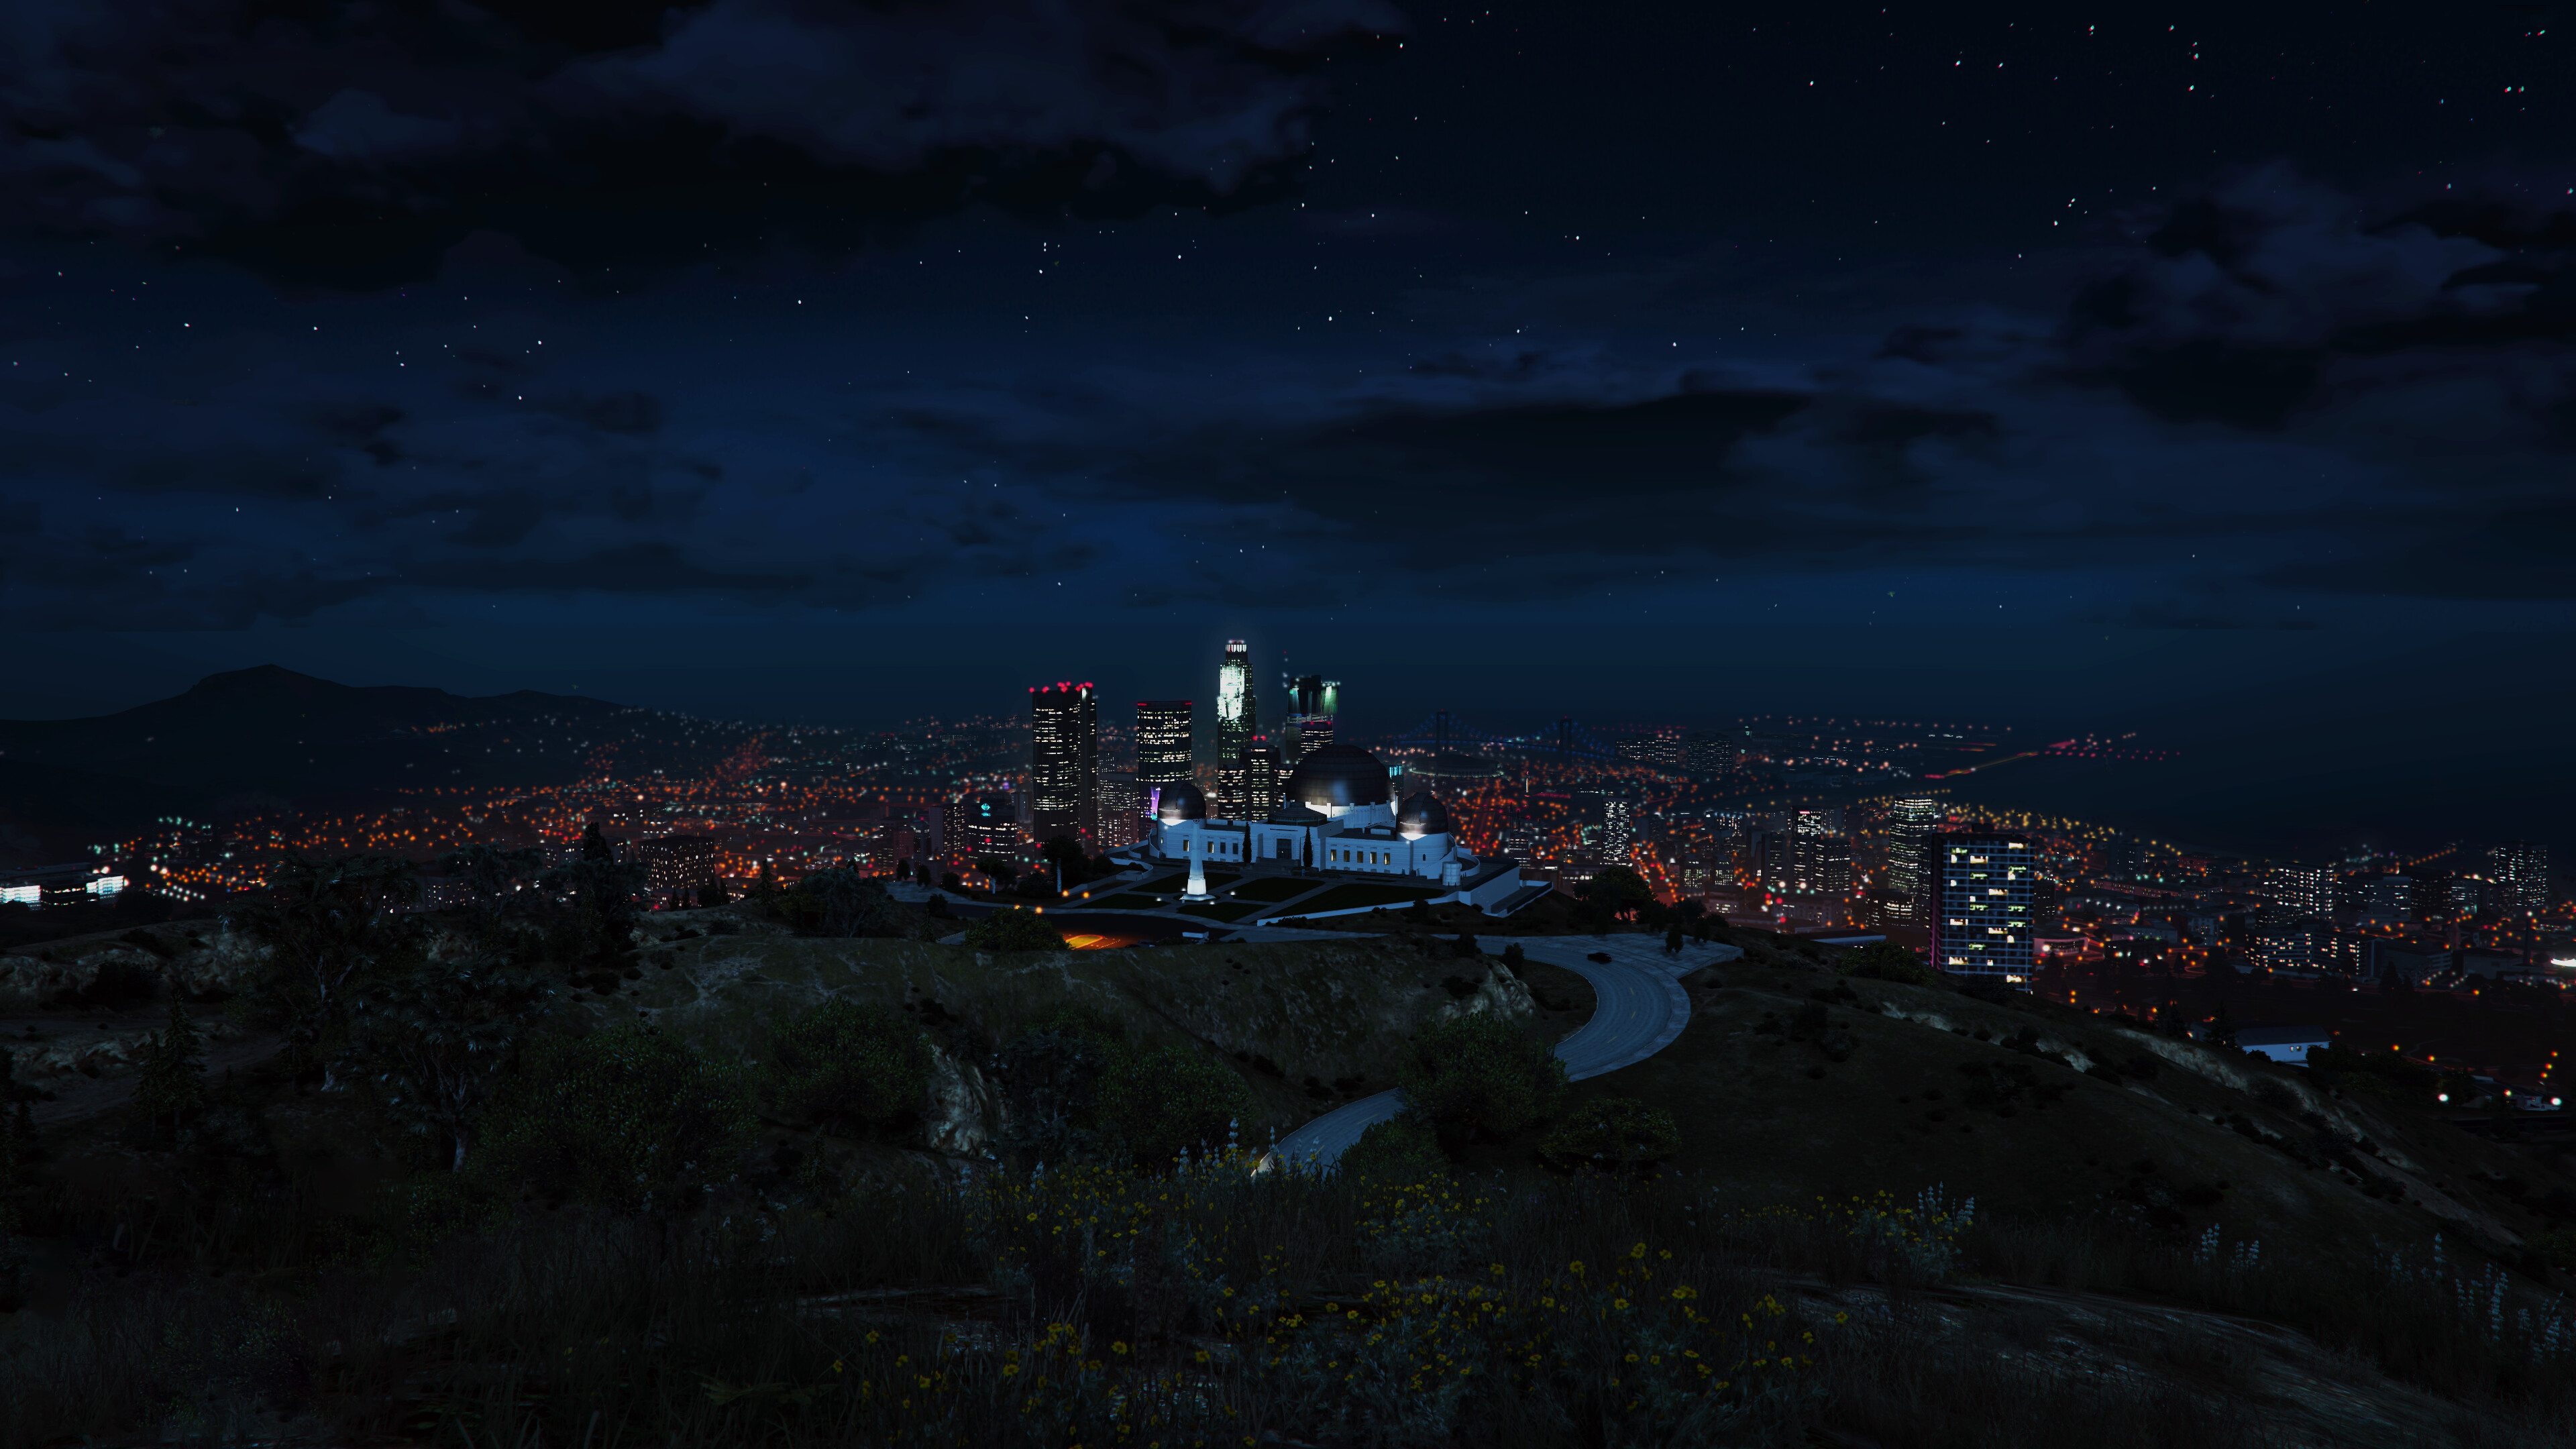 Grand Theft Auto 5: GTA V, Set within the fictional state of San Andreas, Based on Southern California. 3840x2160 4K Wallpaper.